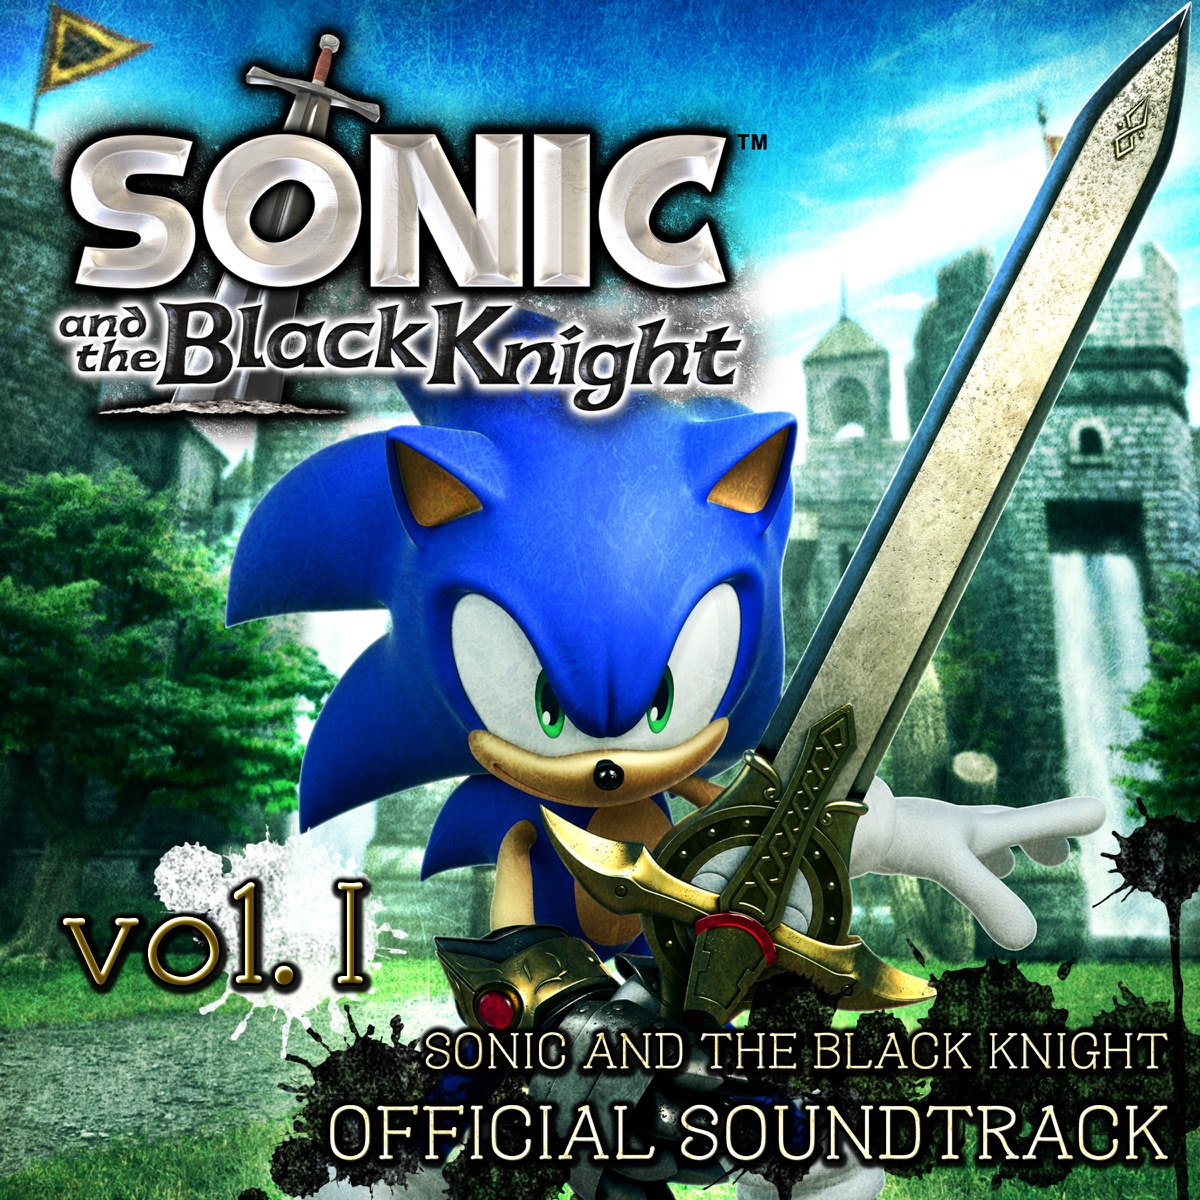 Sonic the Hedgehog 2006 - Album by Goodknight Productions - Apple Music